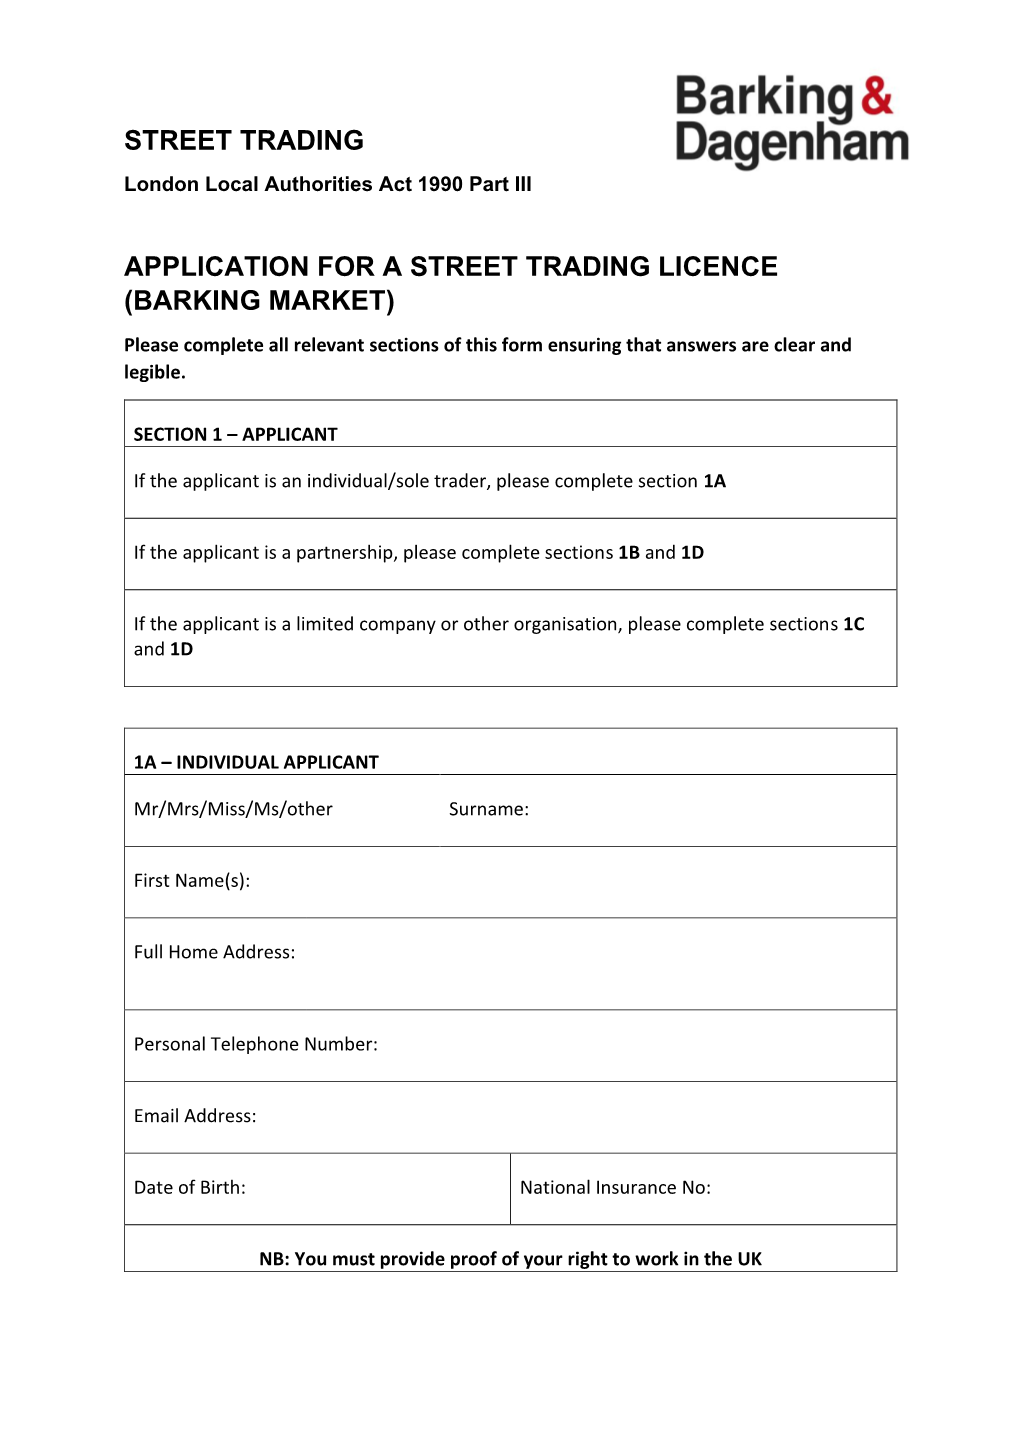 Application for a Market Trading Licence